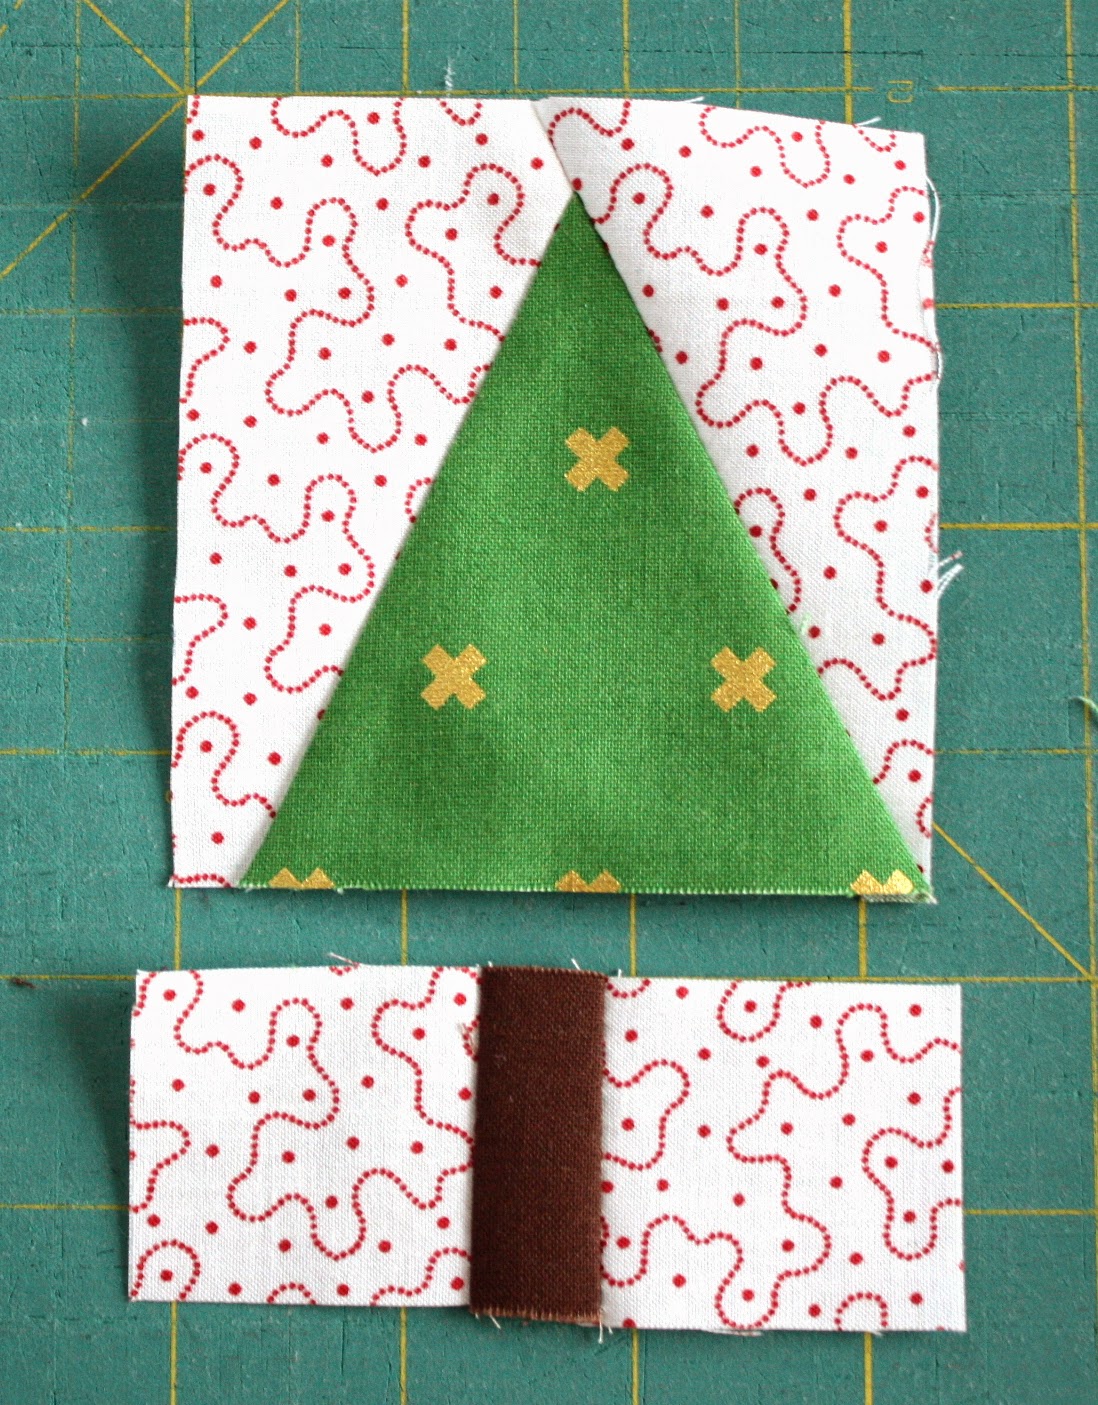 Patchwork Christmas Tree Quilt Blocks Tutorials Diary of a Quilter